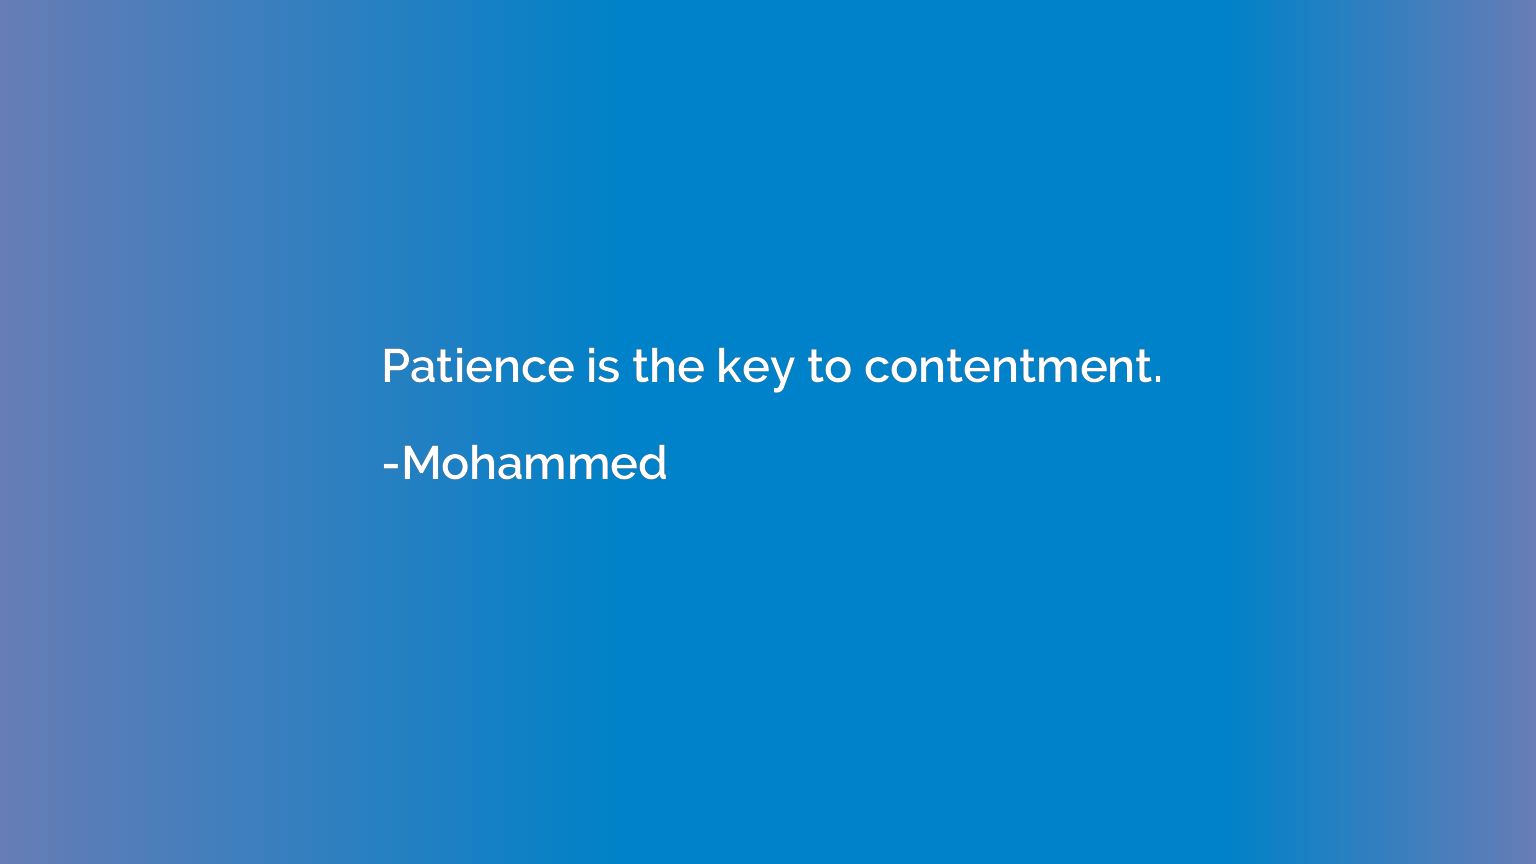 Patience is the key to contentment.